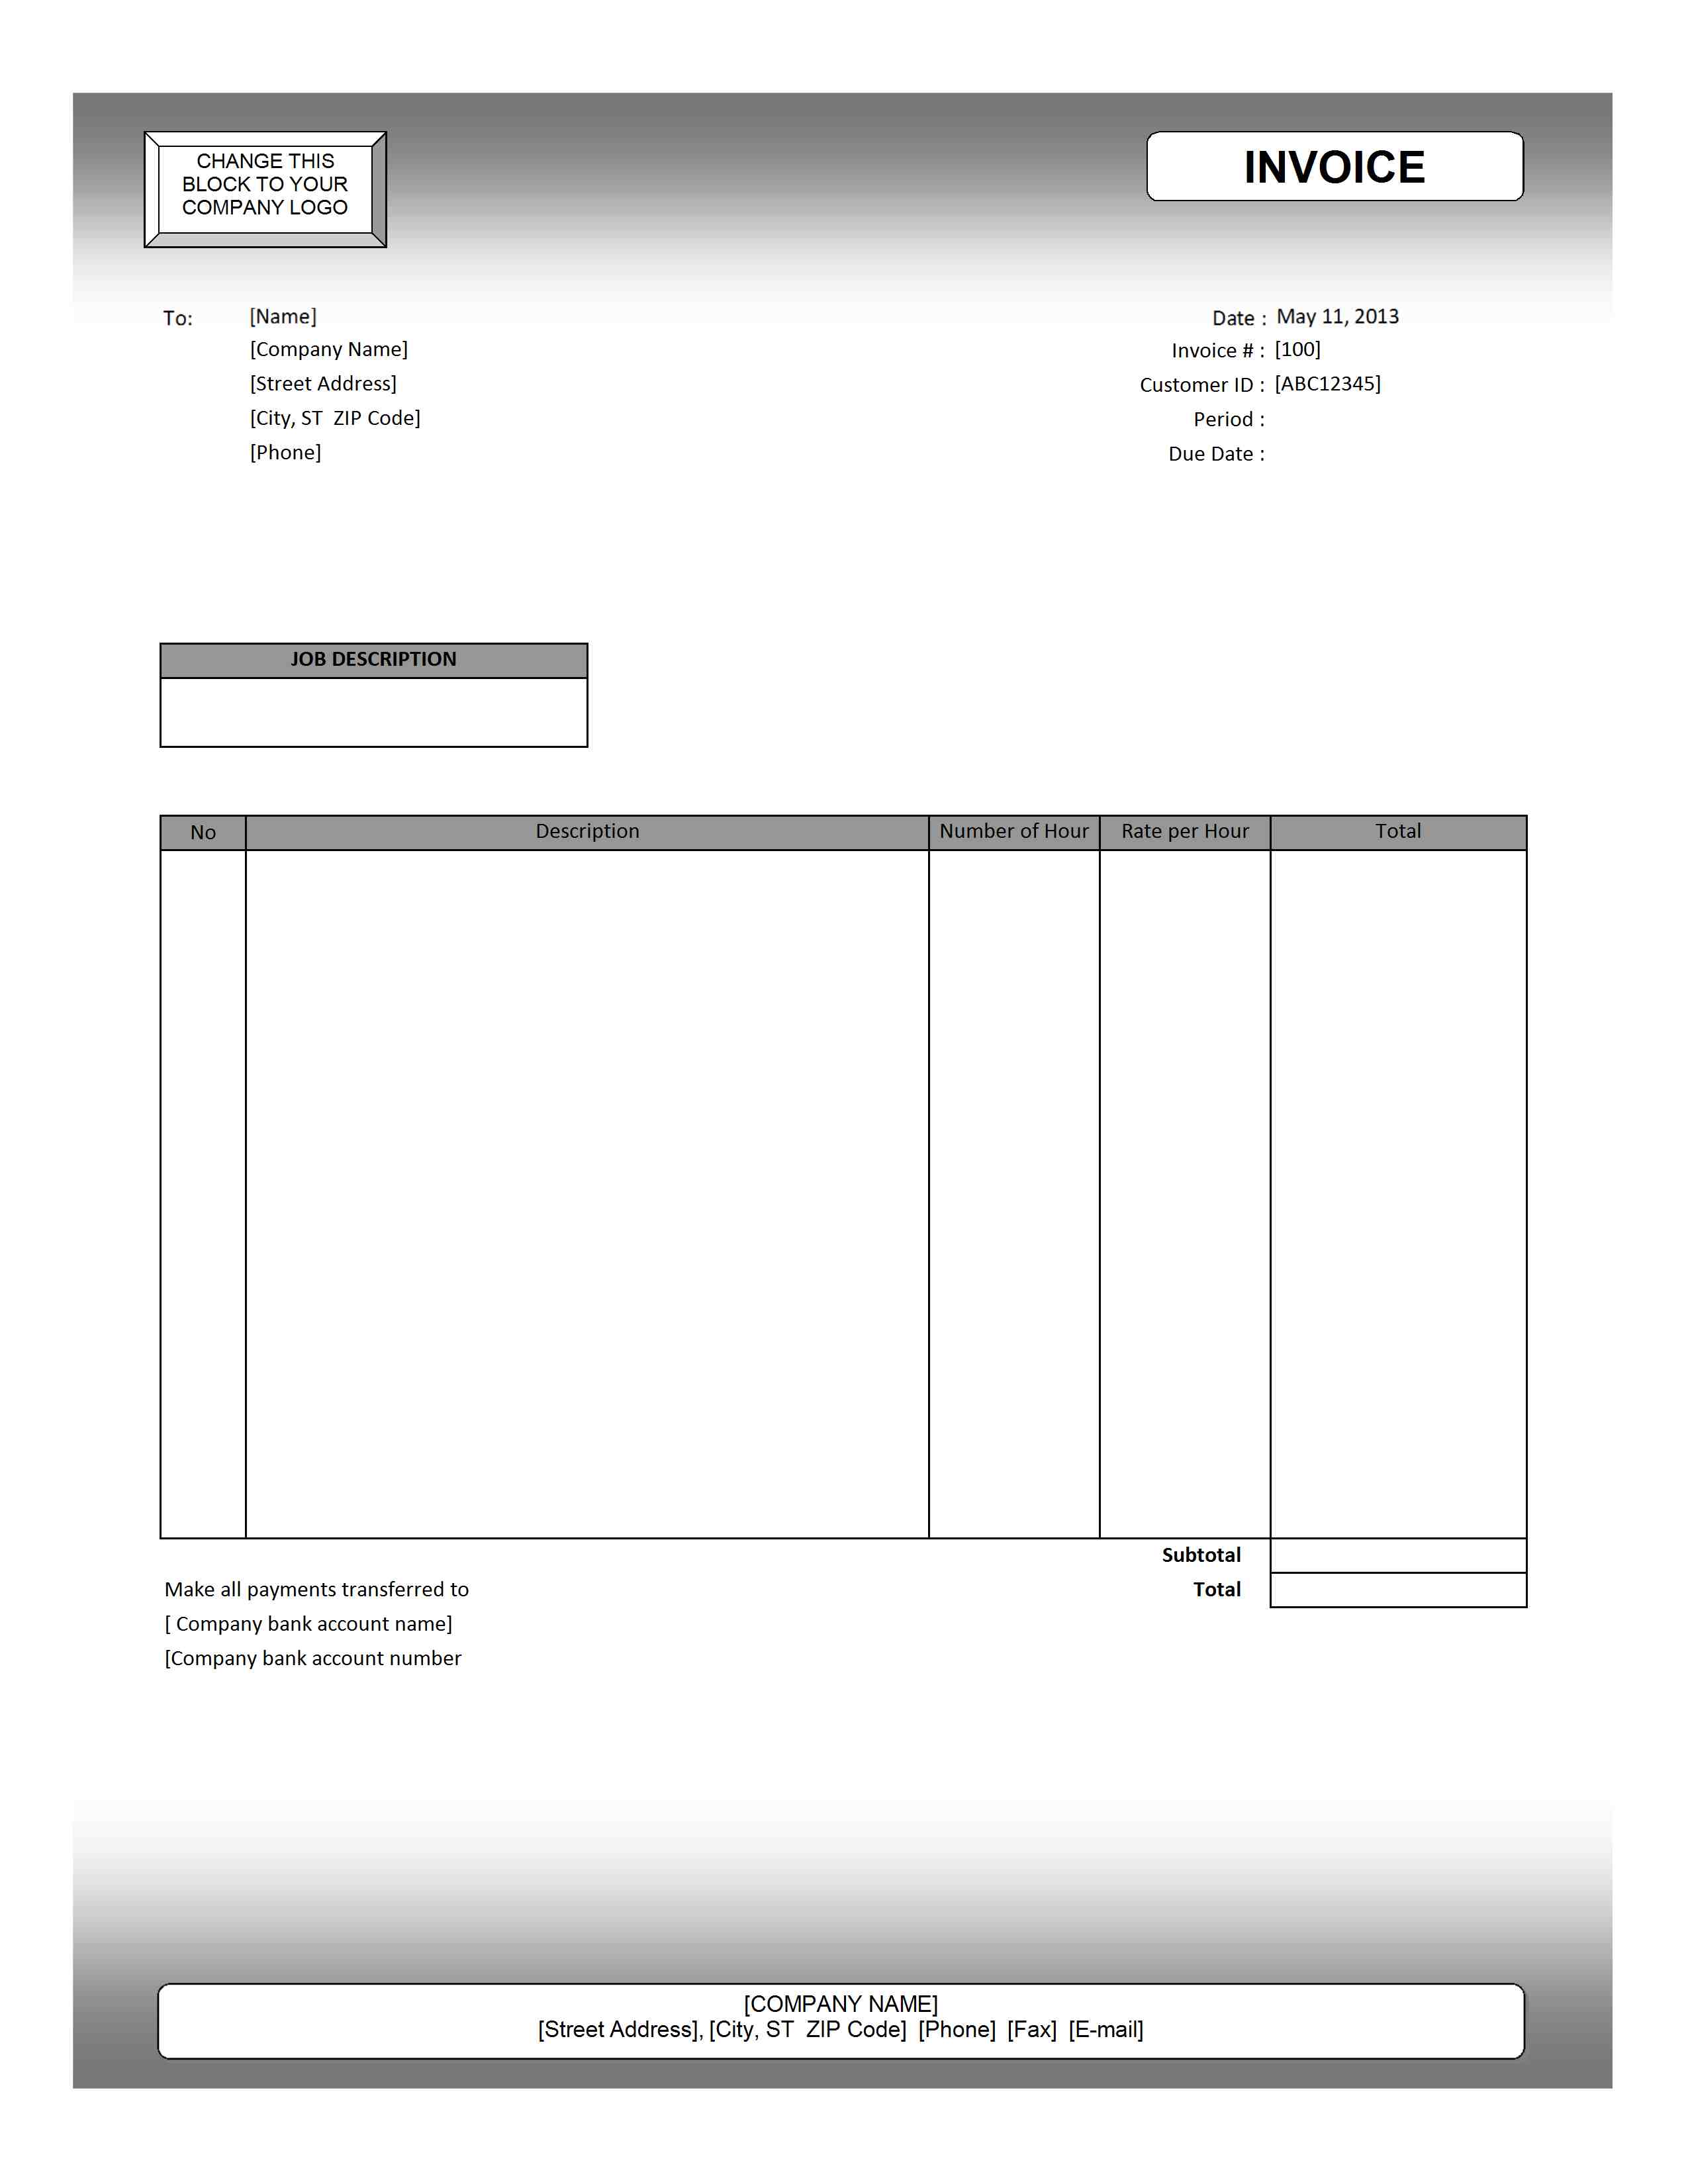 download invoice template in excel